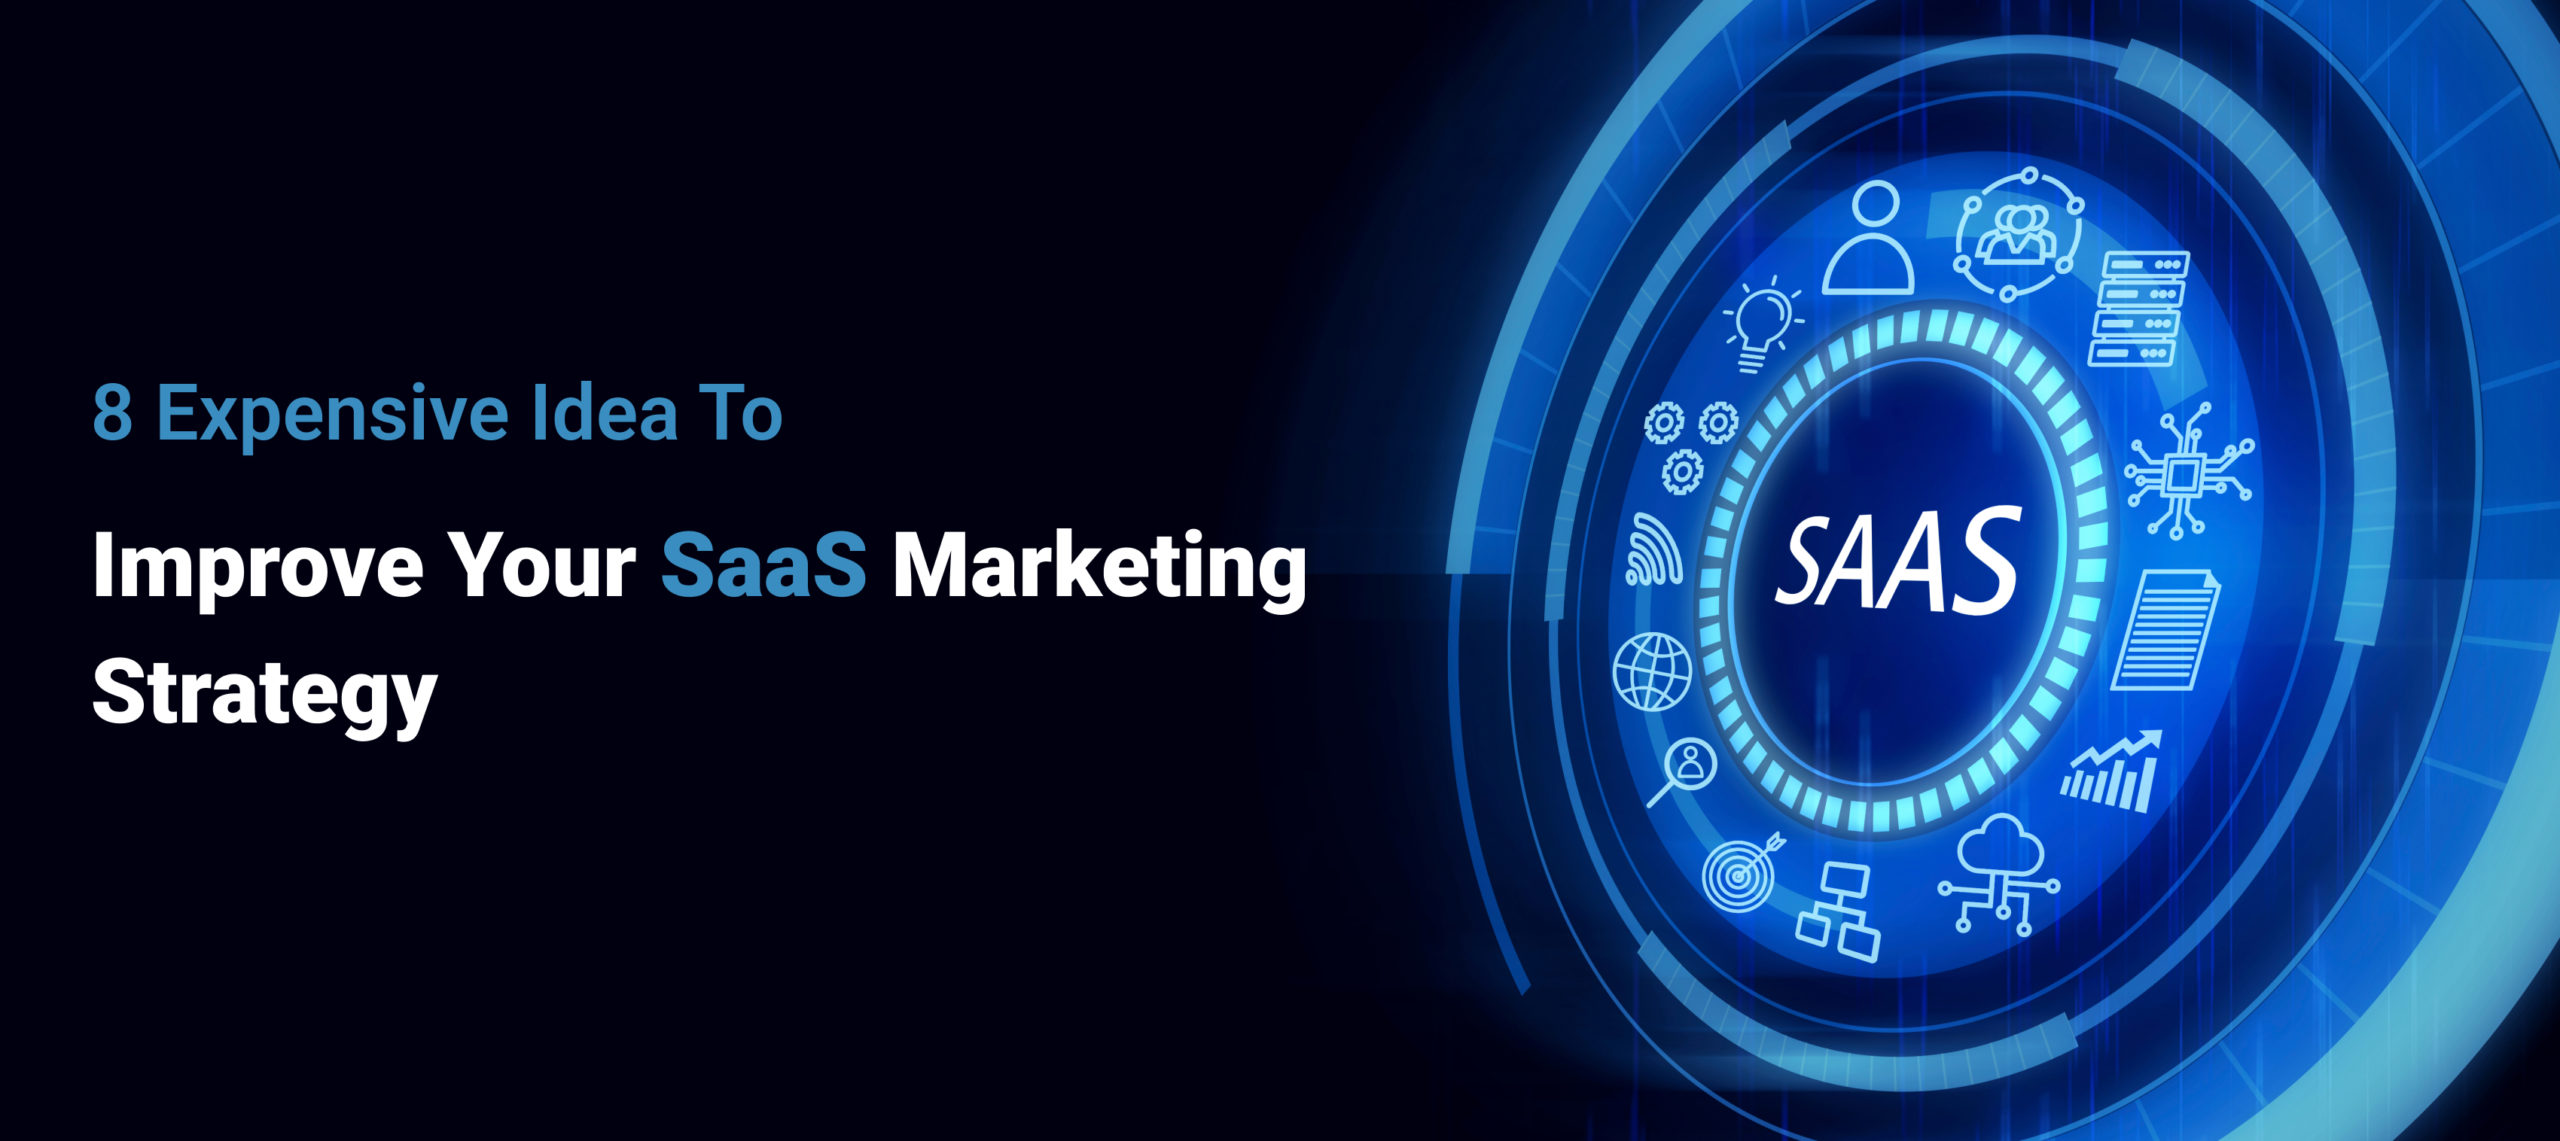  8 Inexpensive Ideas To Improve Your SaaS Marketing Strategy